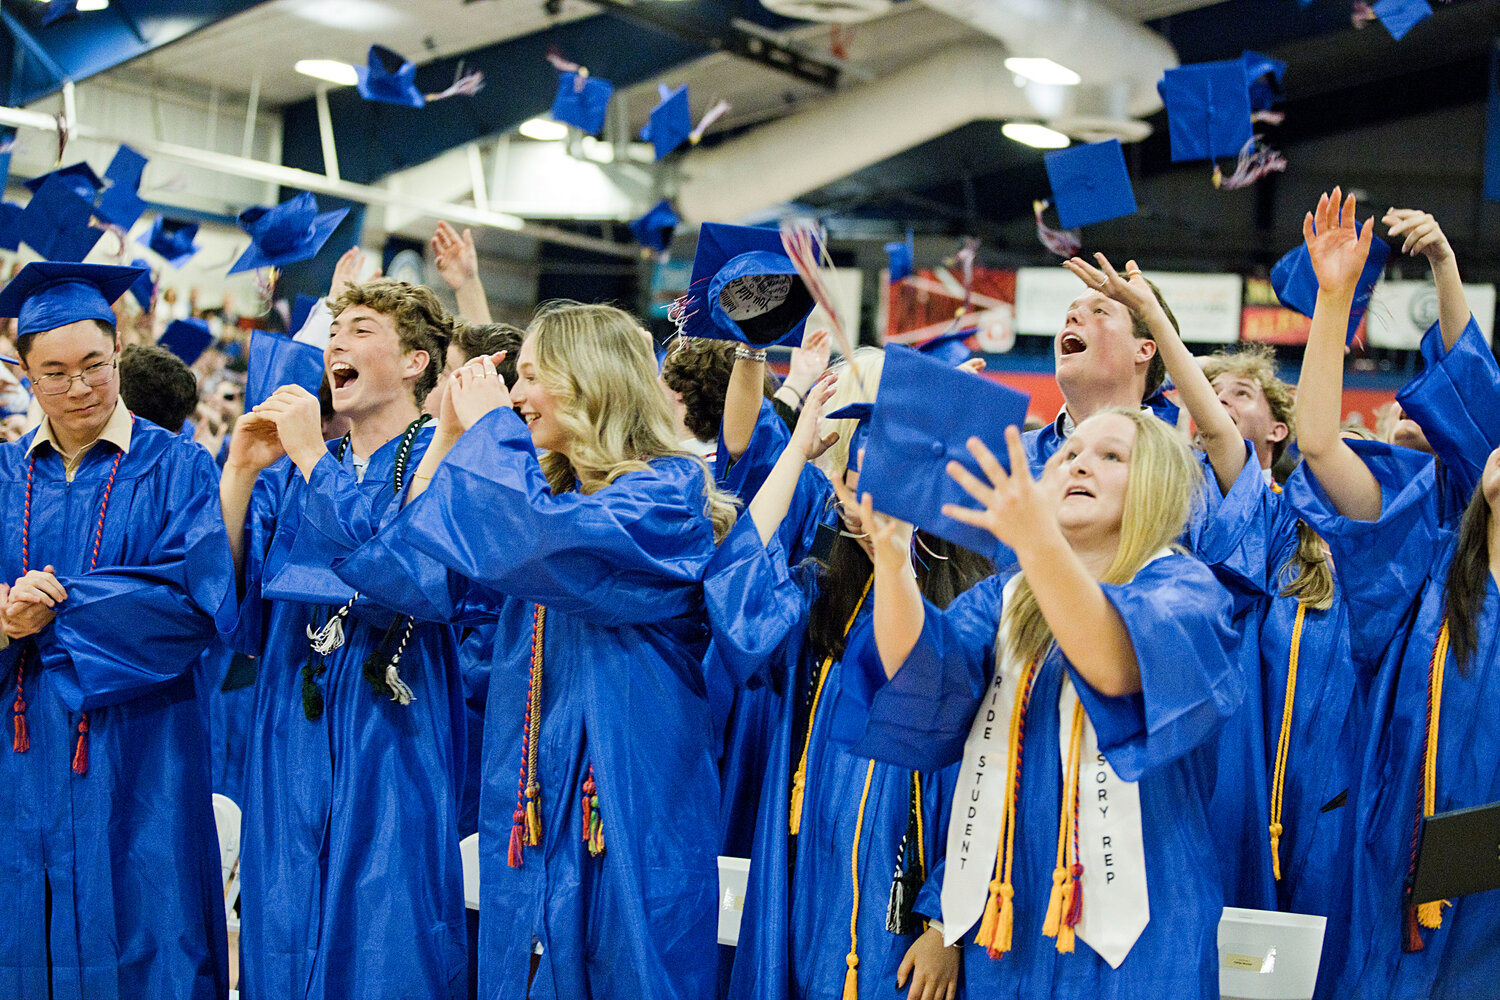 Portsmouth High seniors toss their caps at the end of Friday night’s graduation ceremony inside the PHS field house. Diplomas were awarded to 195 students.